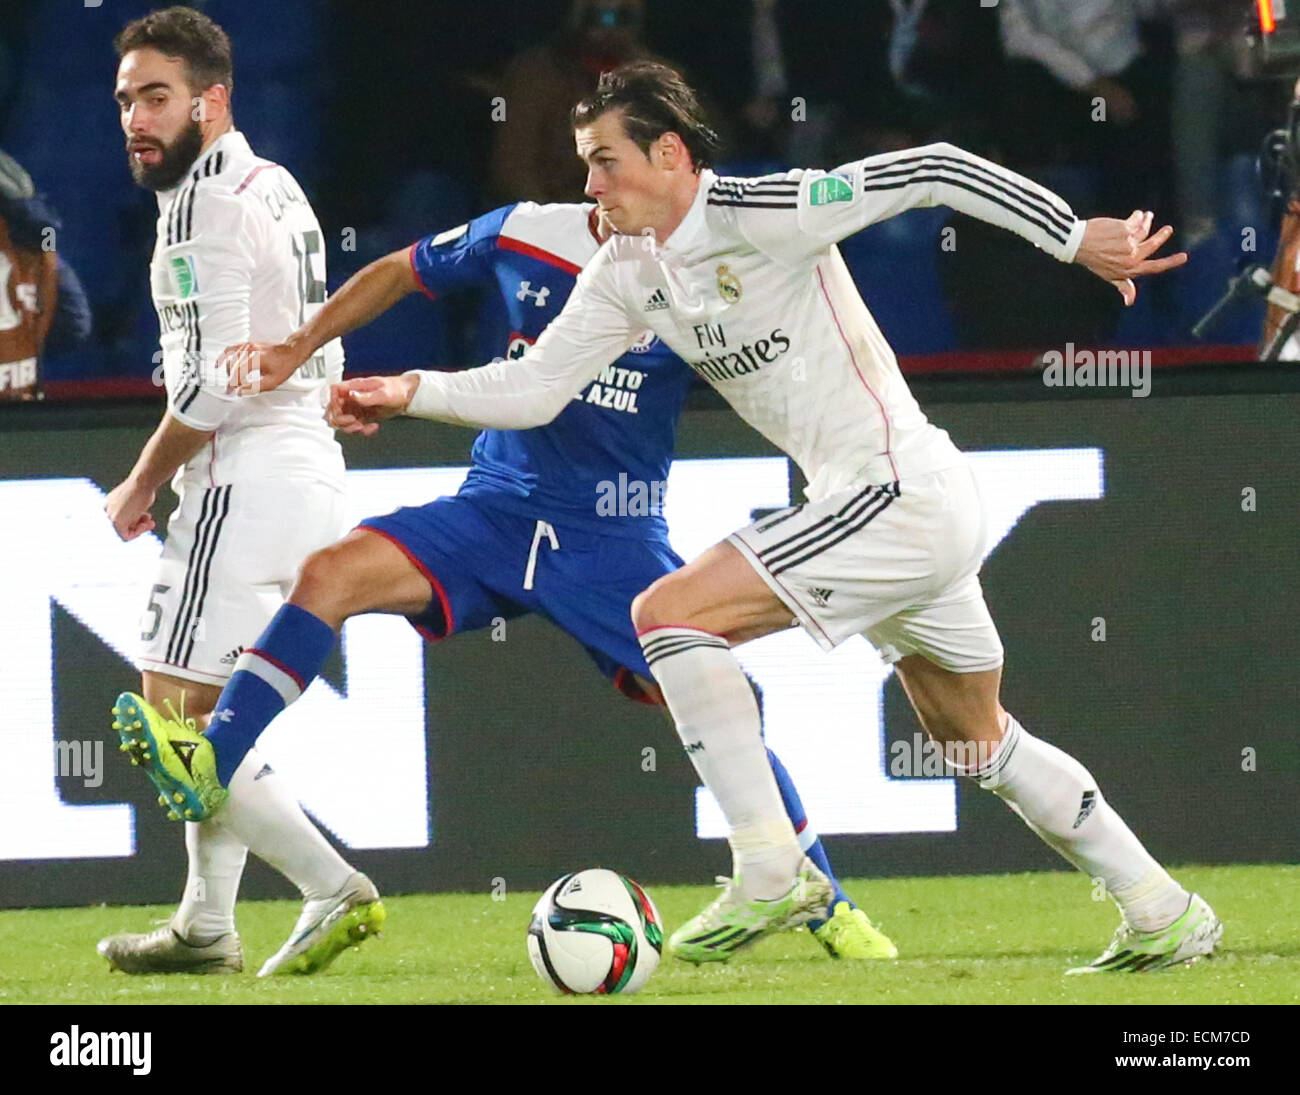 Marrakesh, Morocco. 16th Dec, 2014. FIFA World Club Cup. Cruz Azul versus Real Madrid. Real Madrid midfielder Gareth Bale (11) breaks forward with the ball. Credit:  Action Plus Sports/Alamy Live News Stock Photo